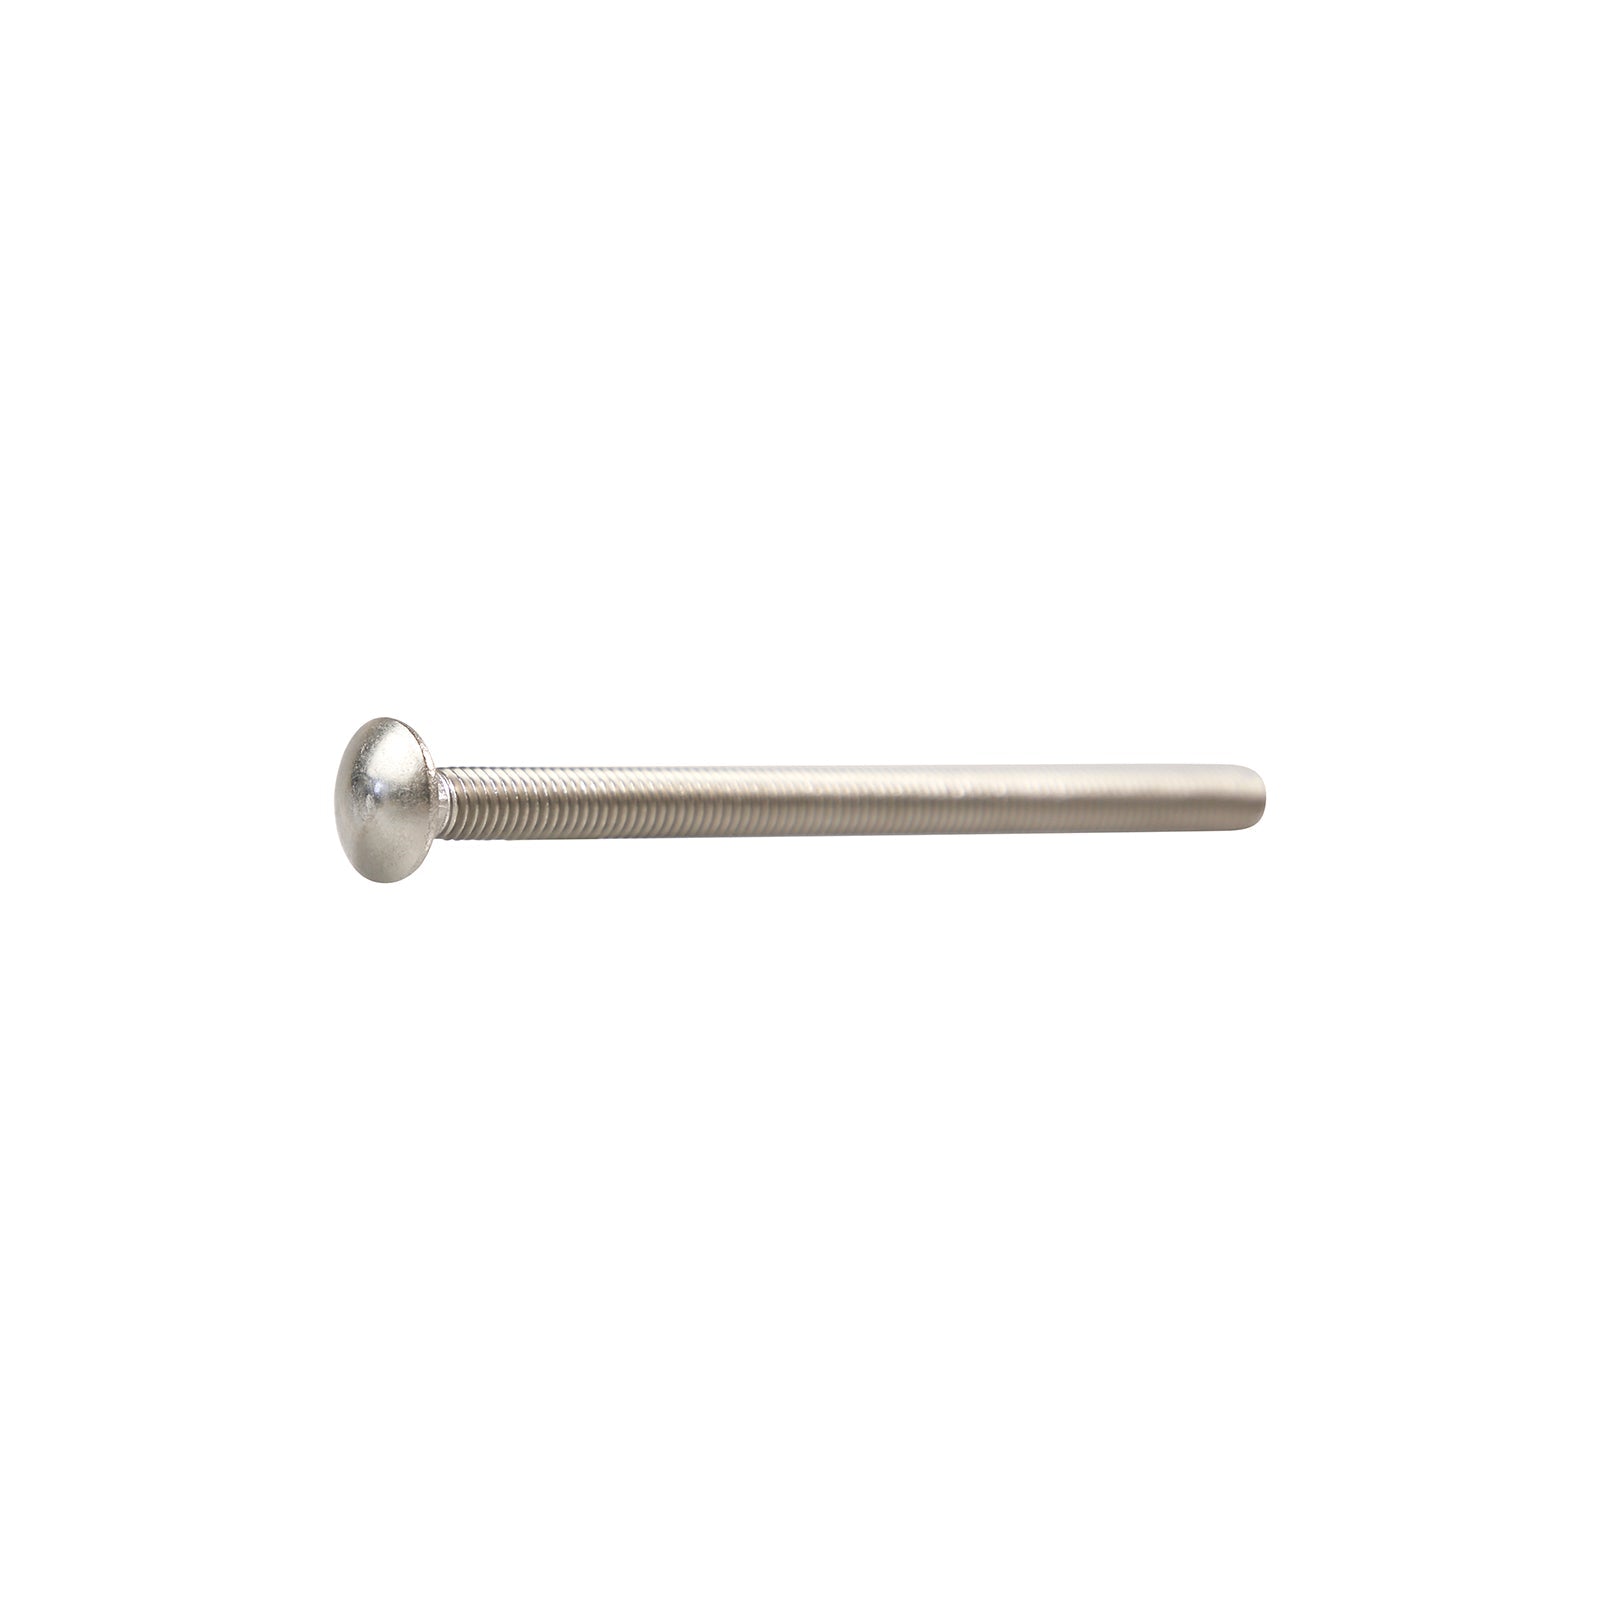 3/8"-16 x 6" Conquest Carriage Bolt - 304 Stainless Steel